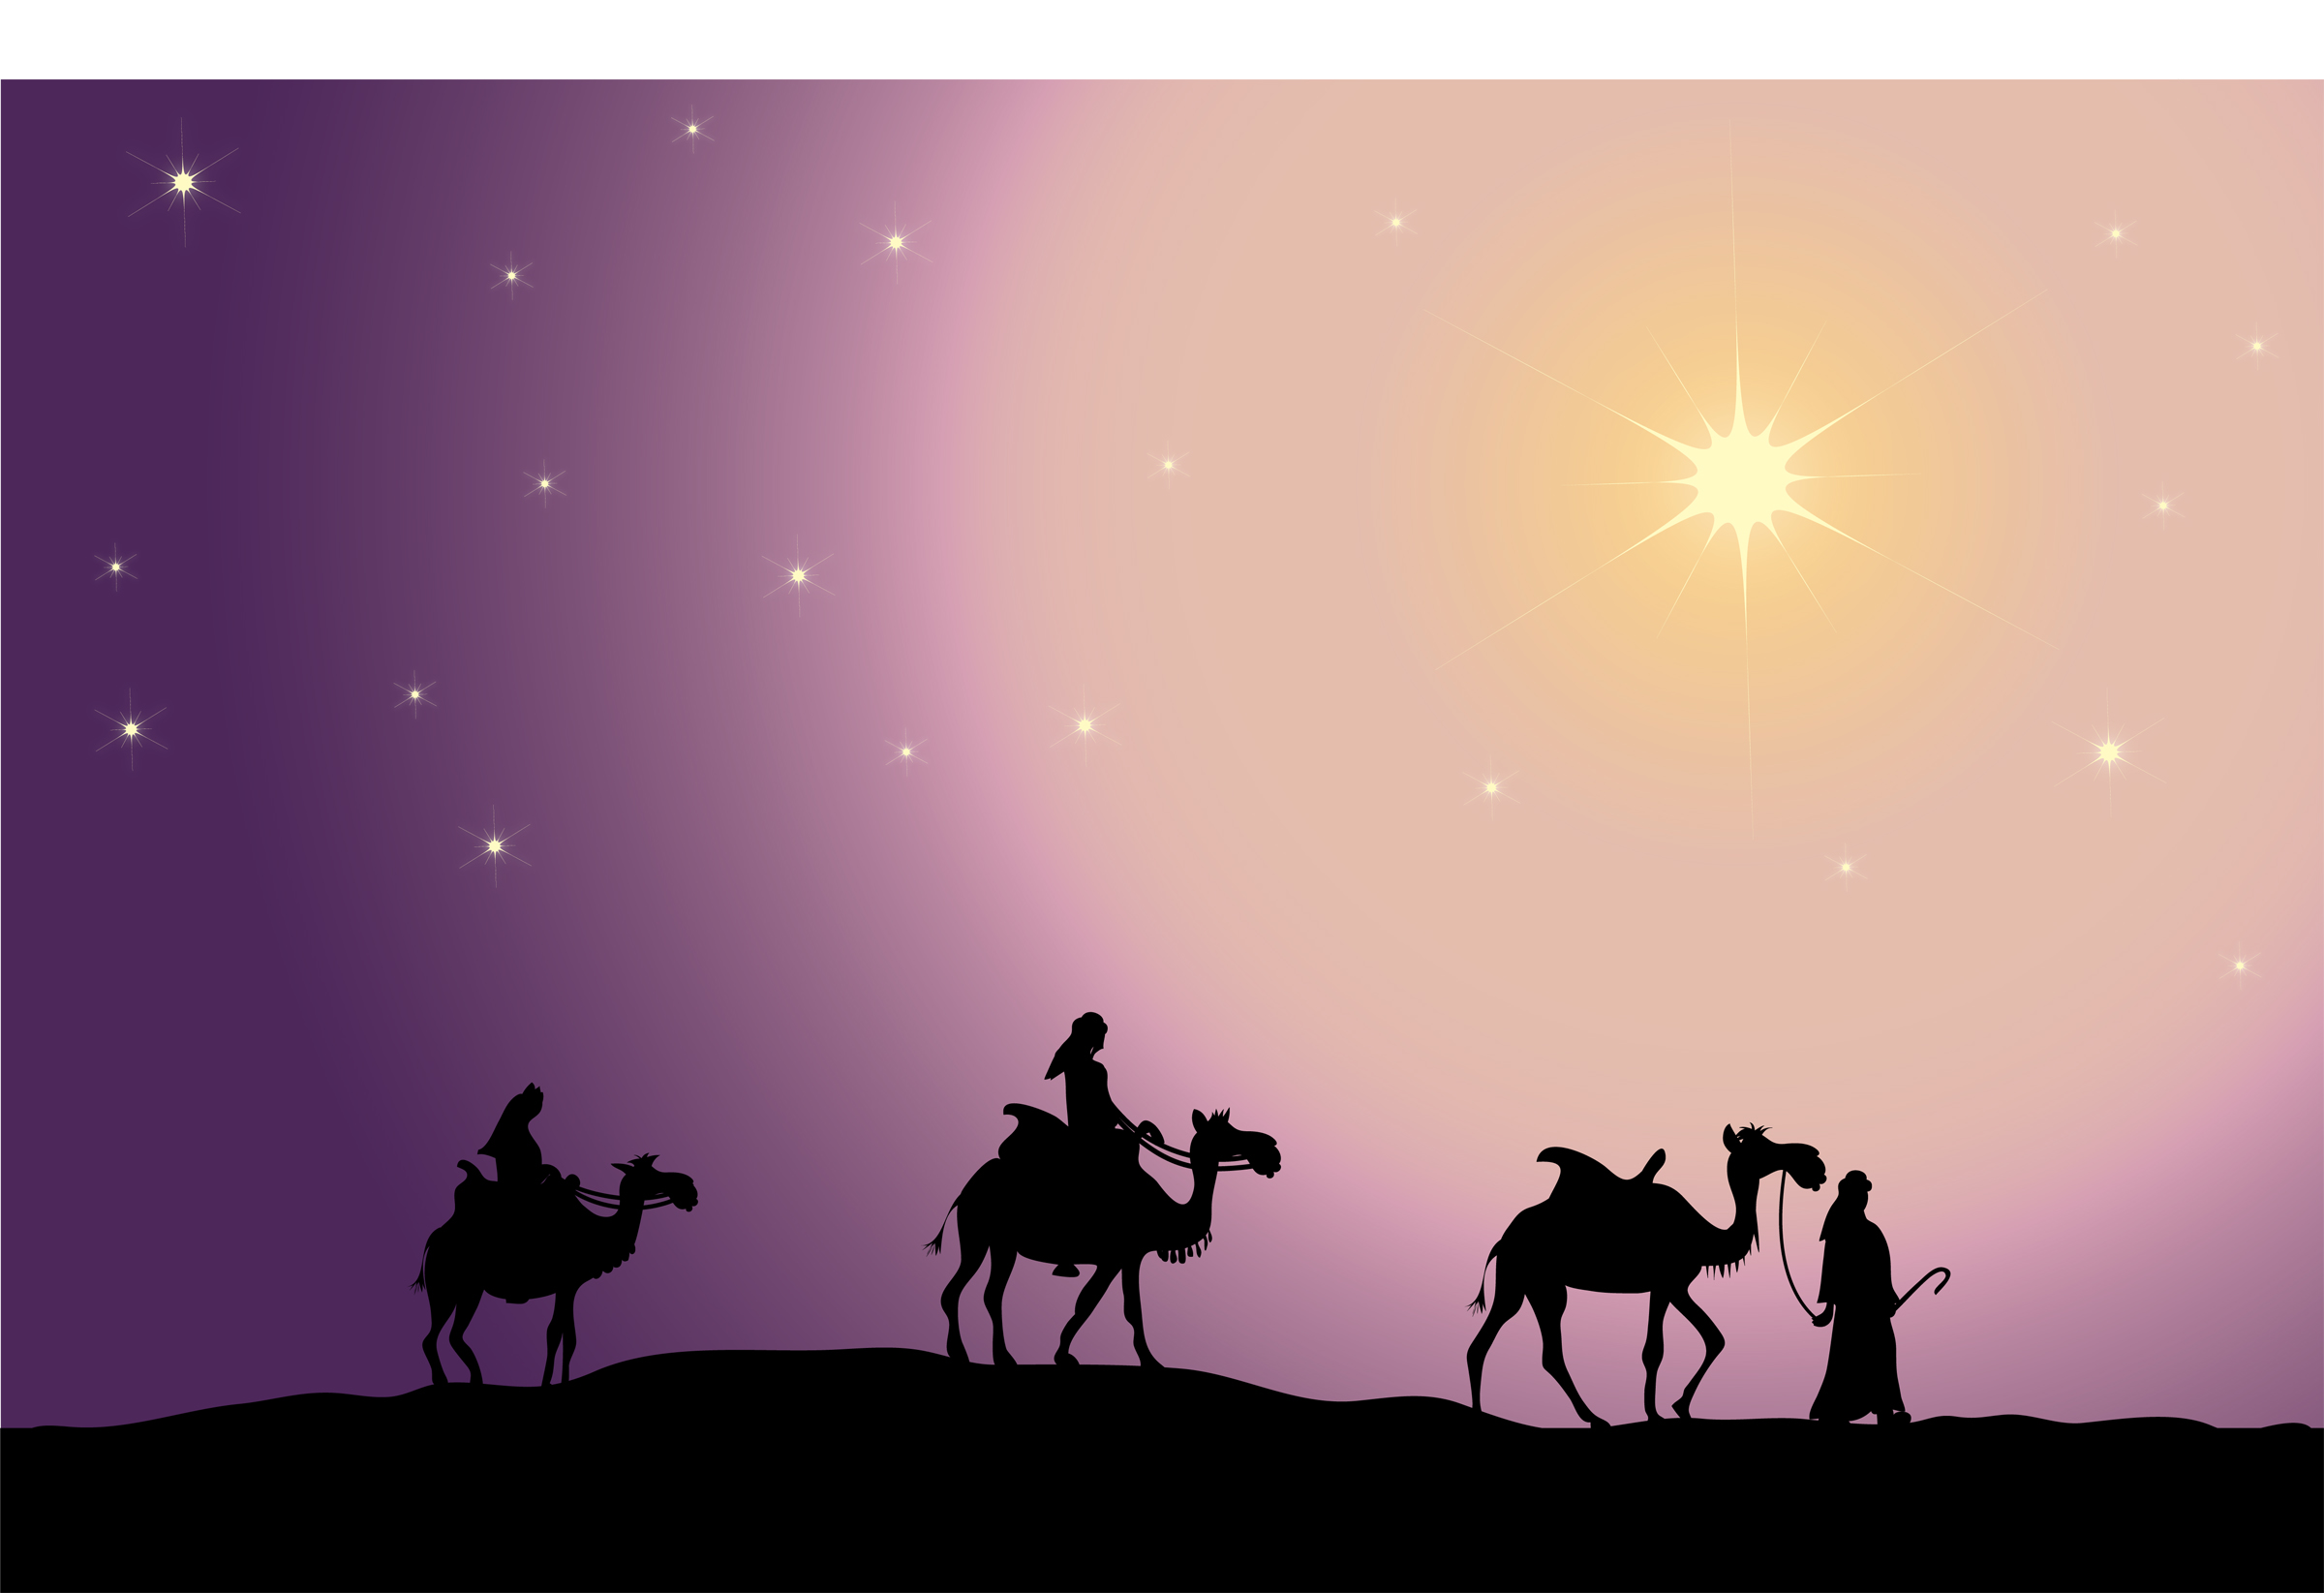 Clip Art Illustration Of A Silhouette Of The Three Wise Men Foll